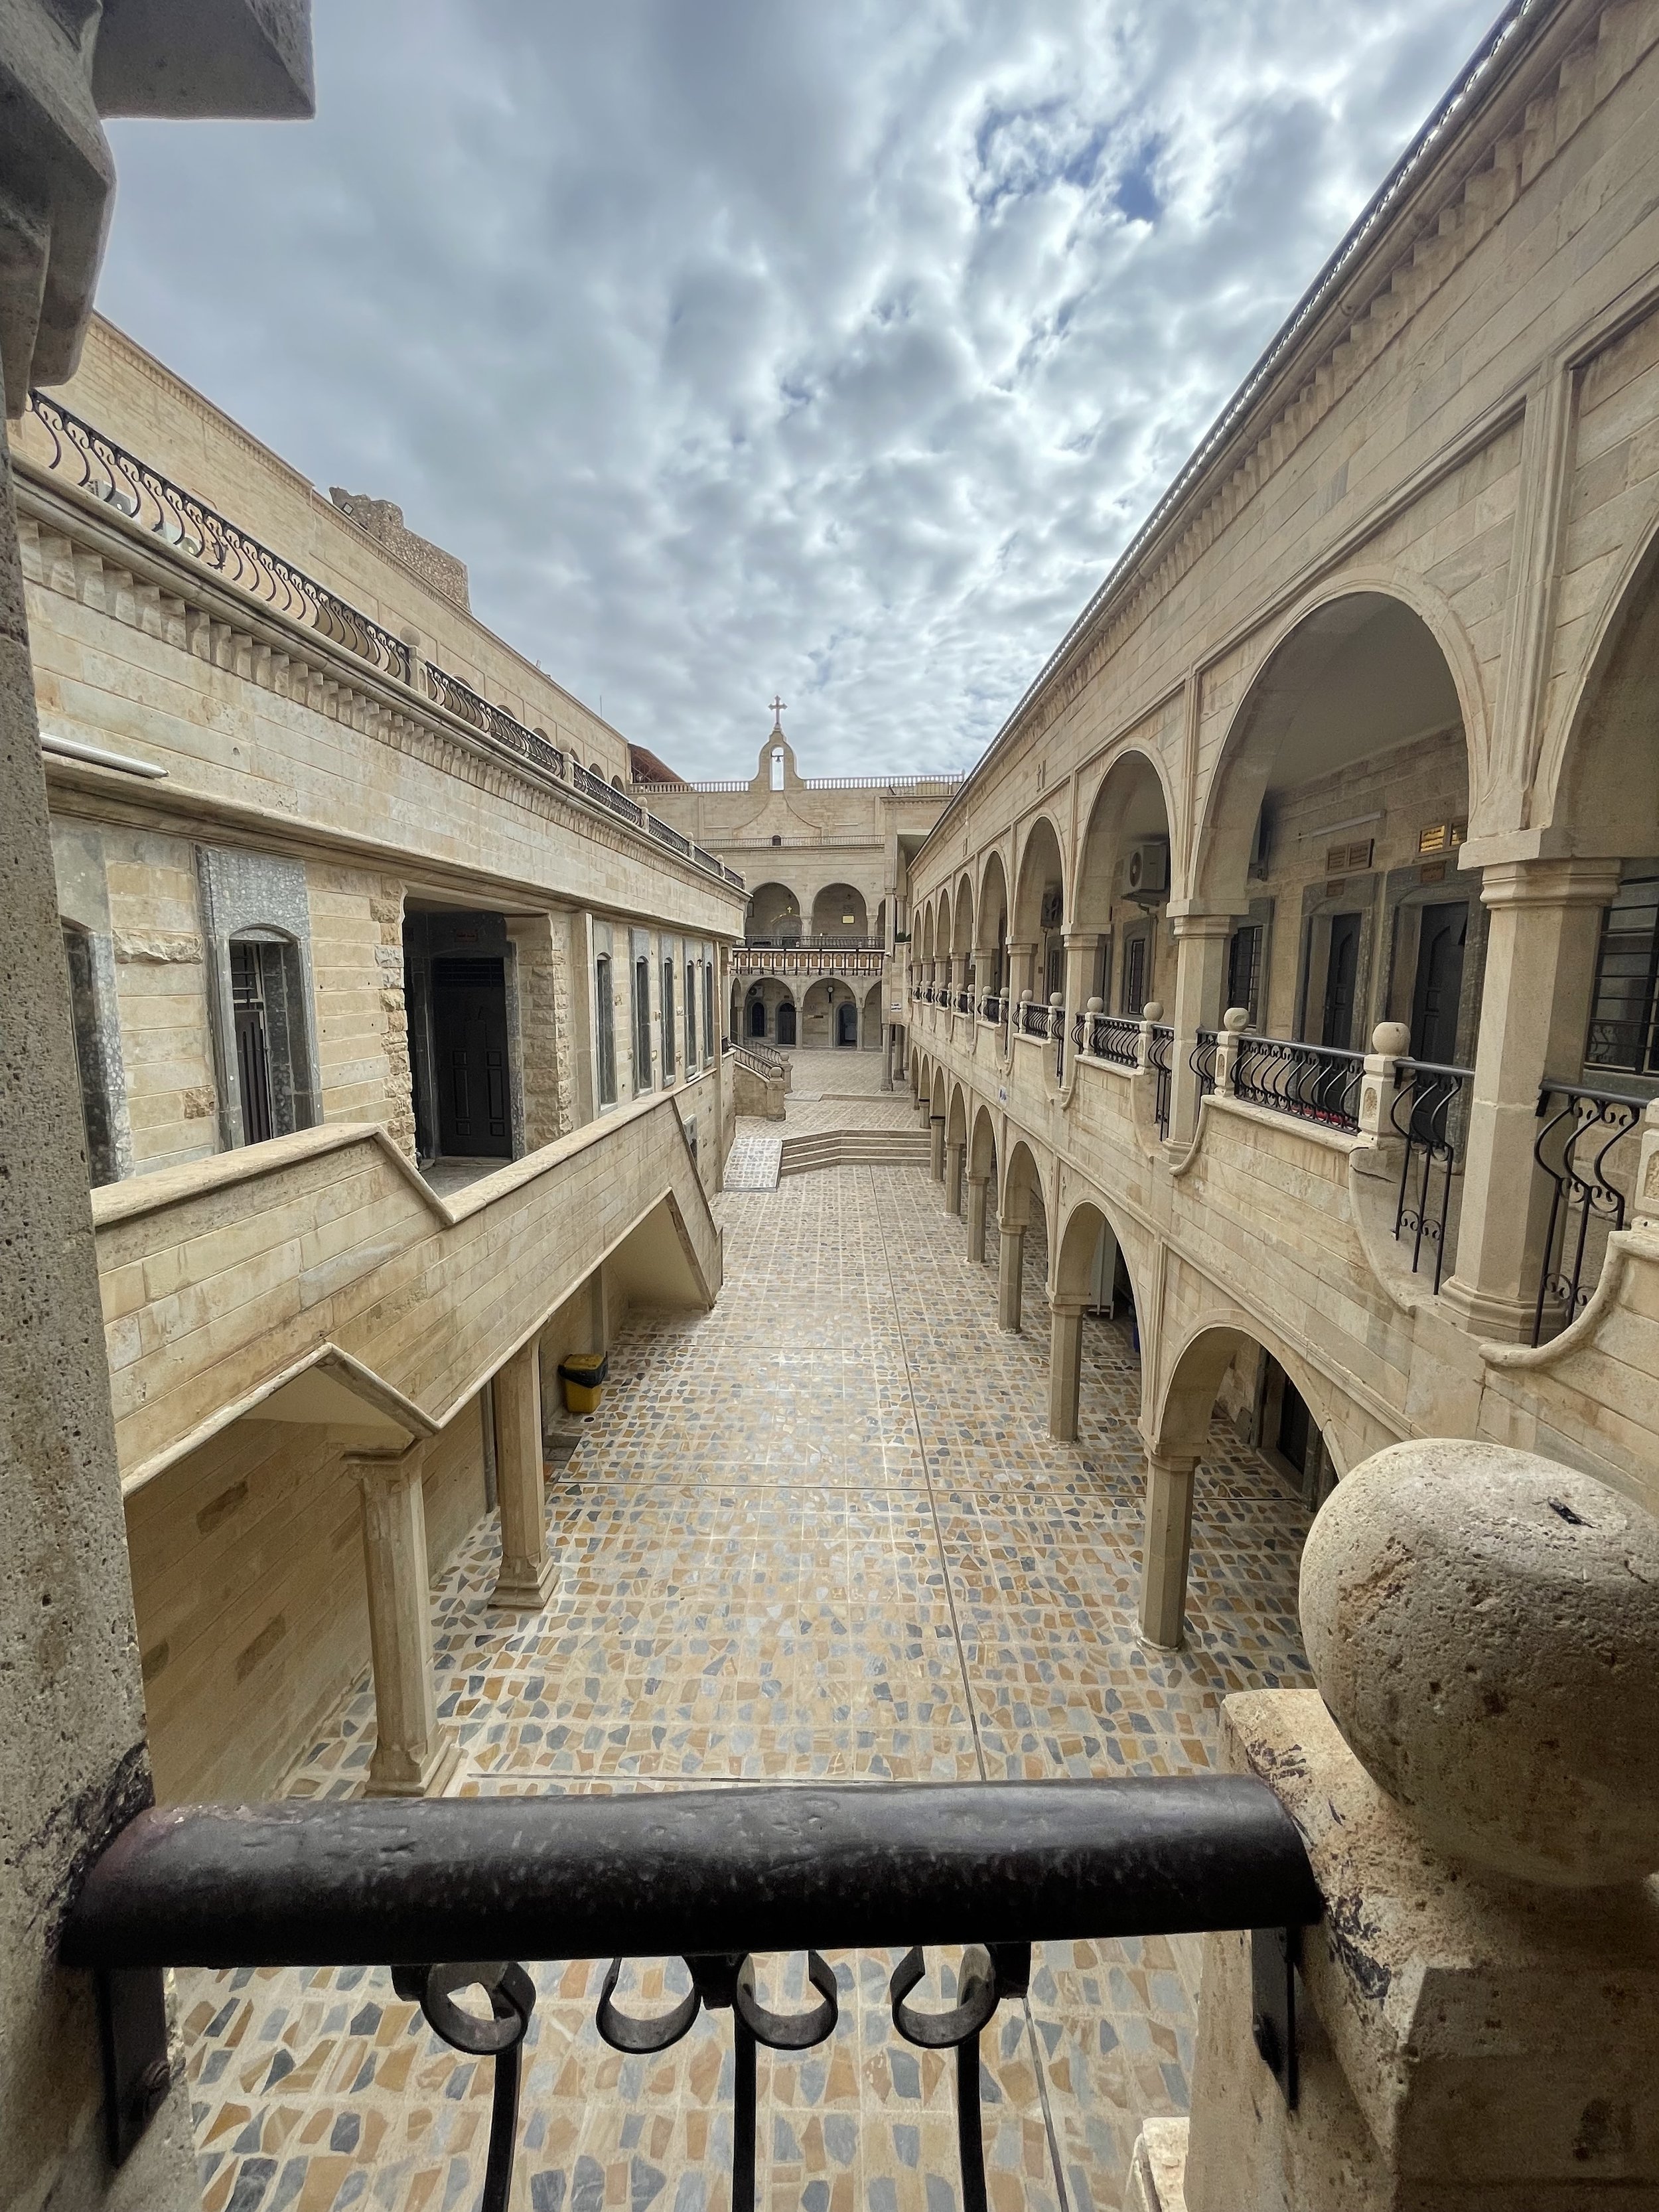  Mar Matti was buried among many bishops, monks, and priests in this monastery. It was well known for its large library and Syriac Christian manuscripts. Also buried in Mar Matti Monastery is one of the great scholars at that time, Ibn Al Ibry. Many 